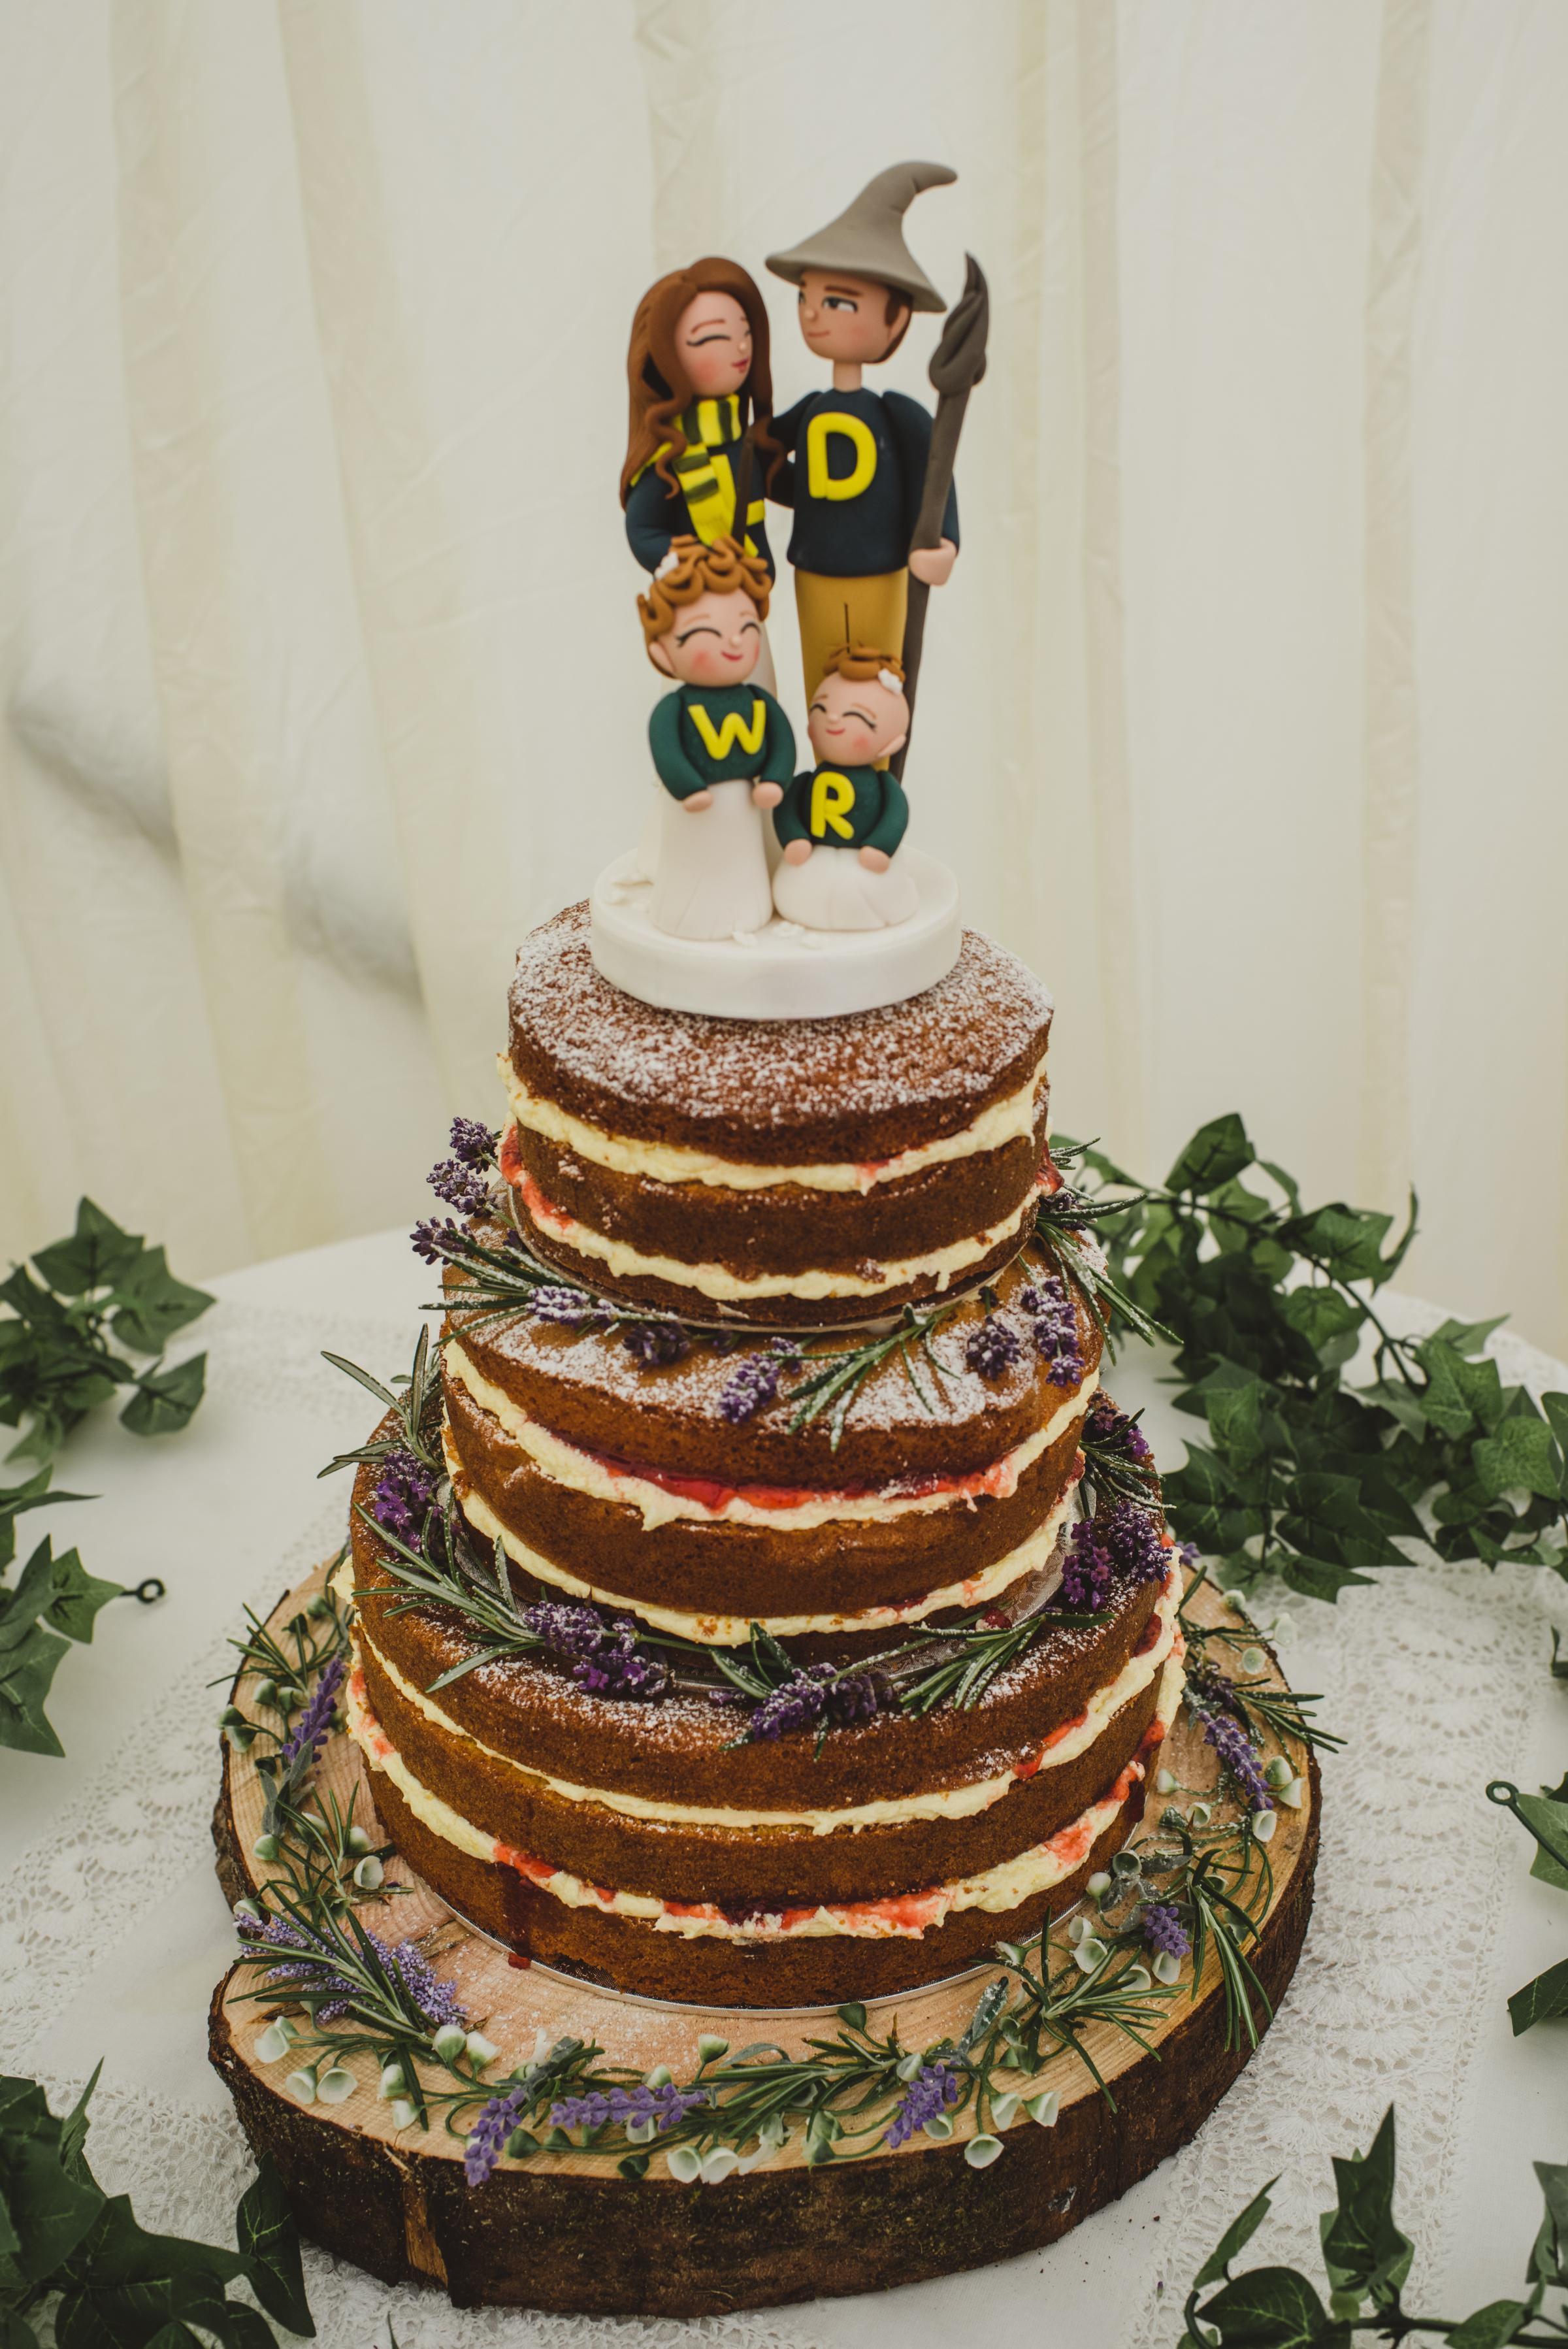 The wedding cake made by Gloria Verner with cake topper by The Sugar Concept. Photo: Erica Irvine.